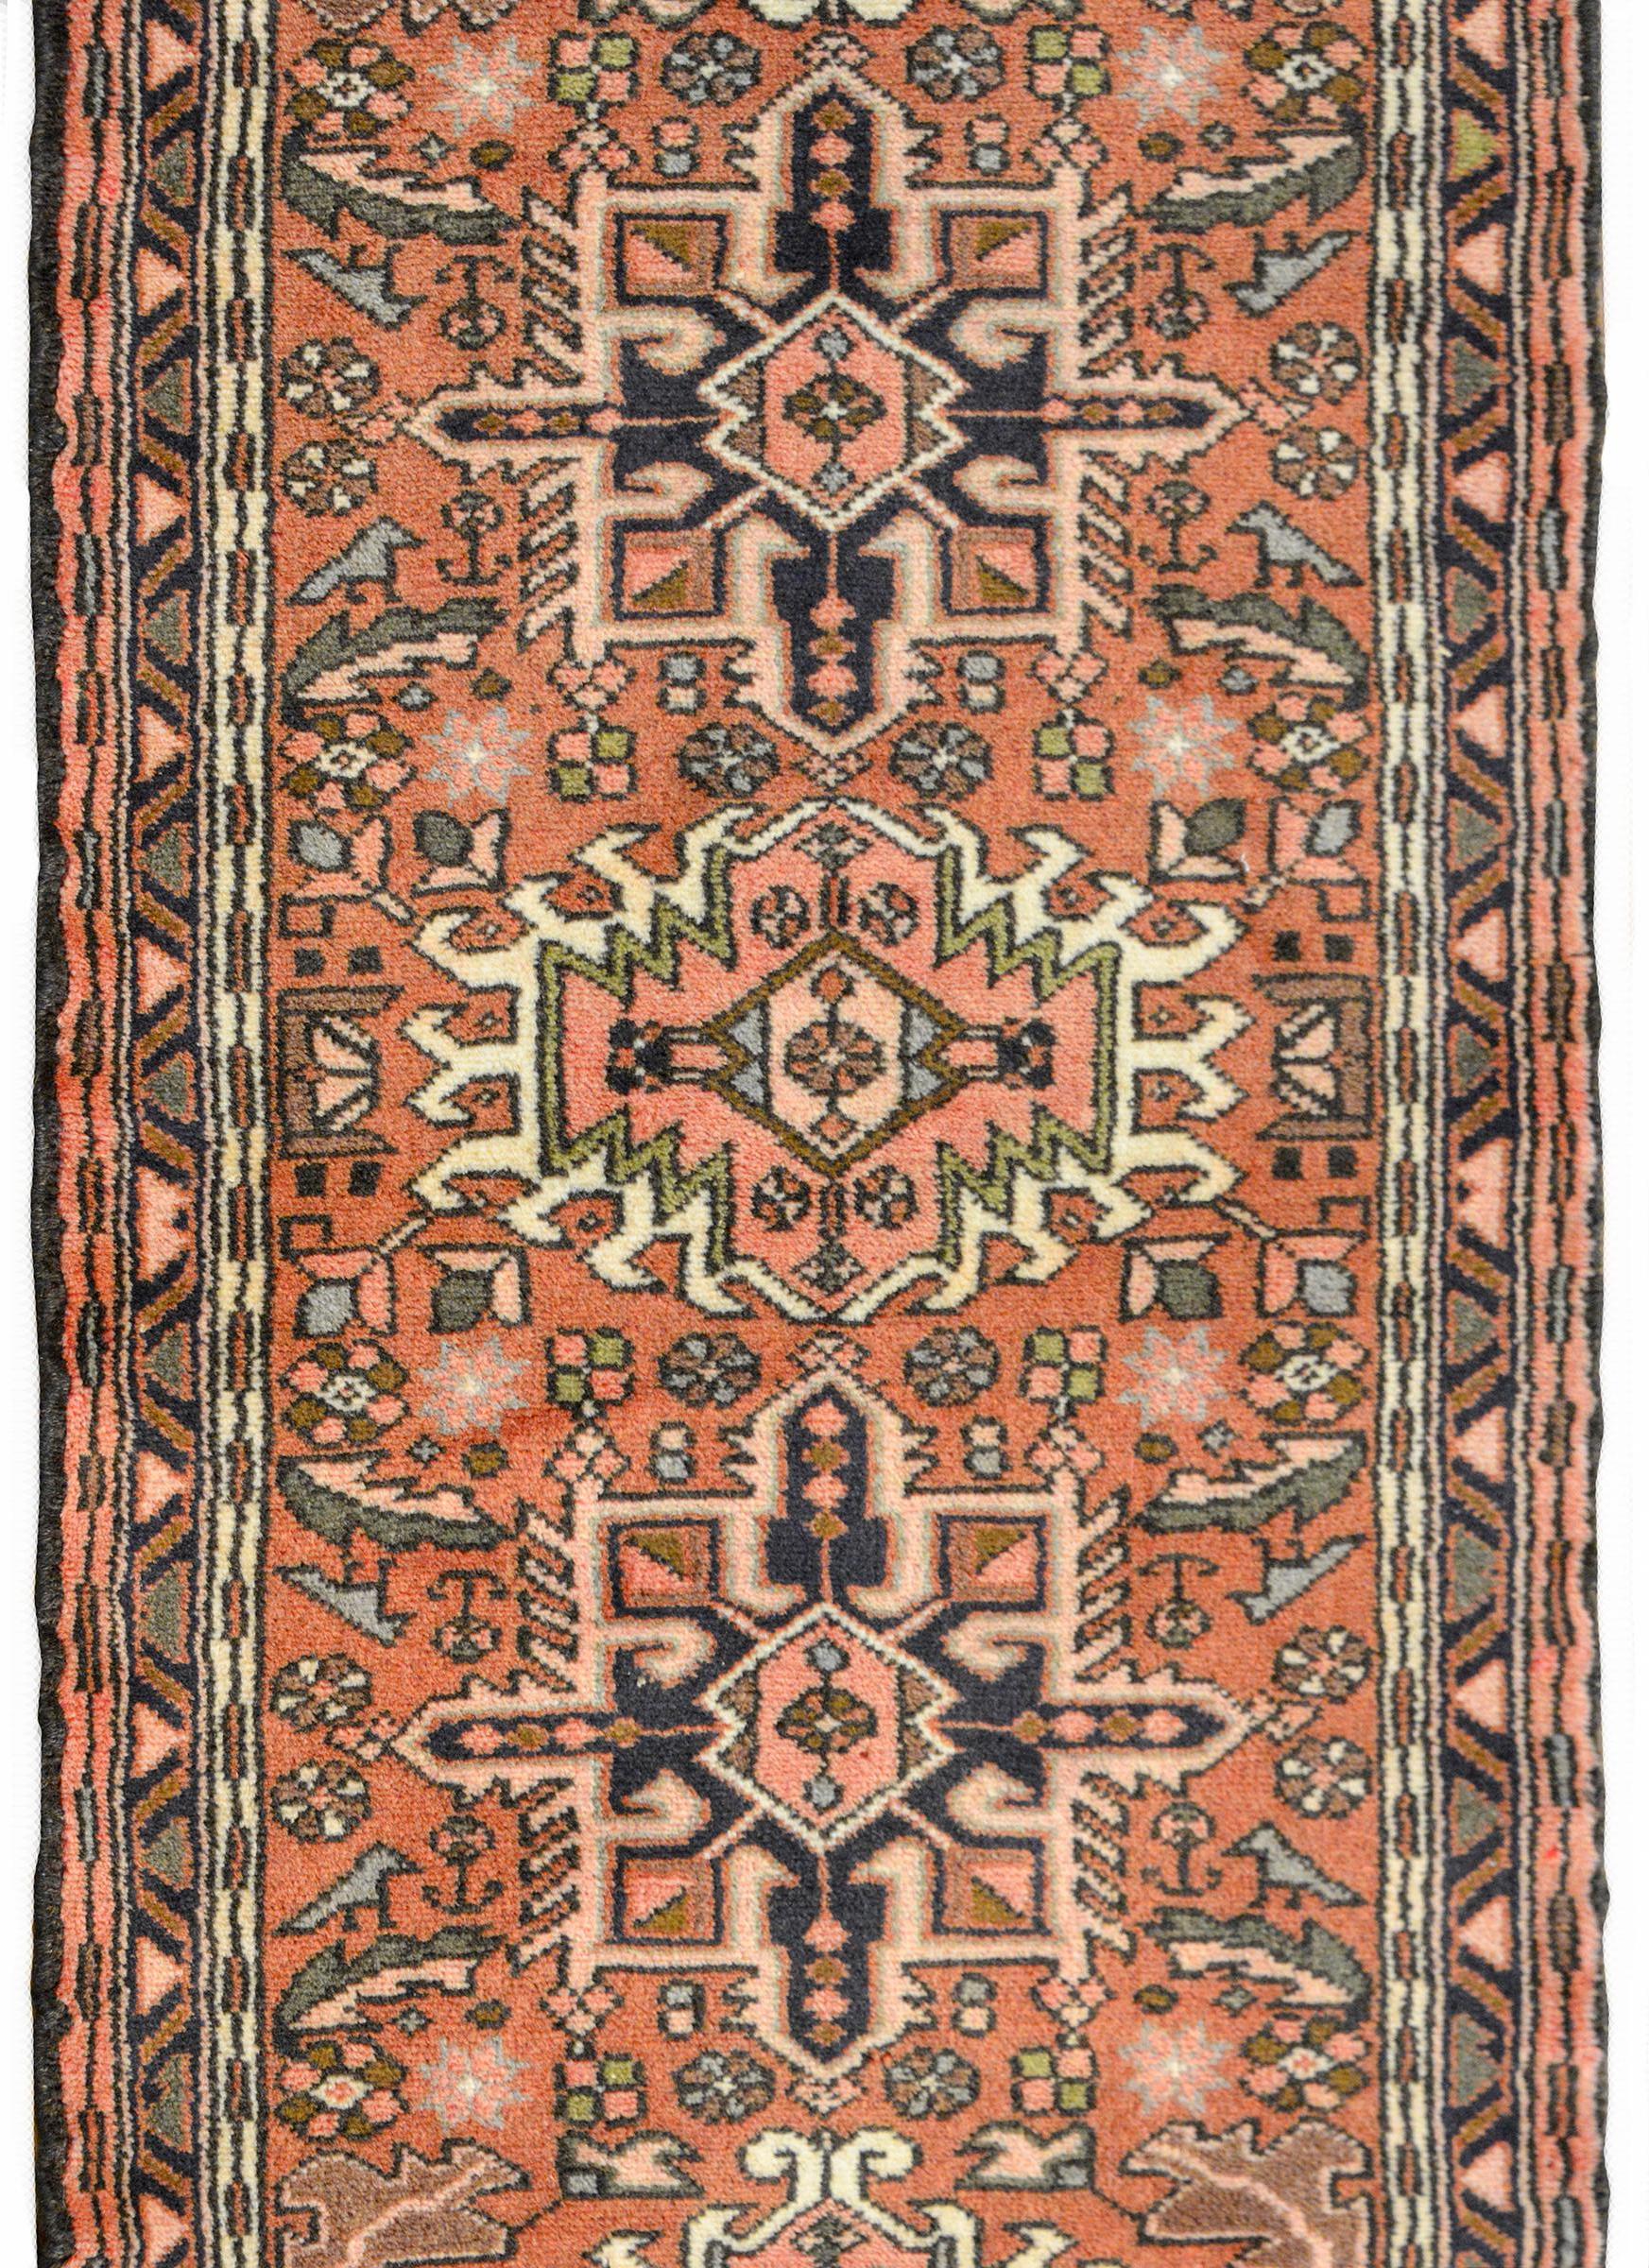 A wonderful mid-20th century Persian Karadja runner with several stylized floral medallions woven in black, pink, light blue, and gold amidst a field of more stylized flowers against a muted crimson background. The border is wonderful composed with